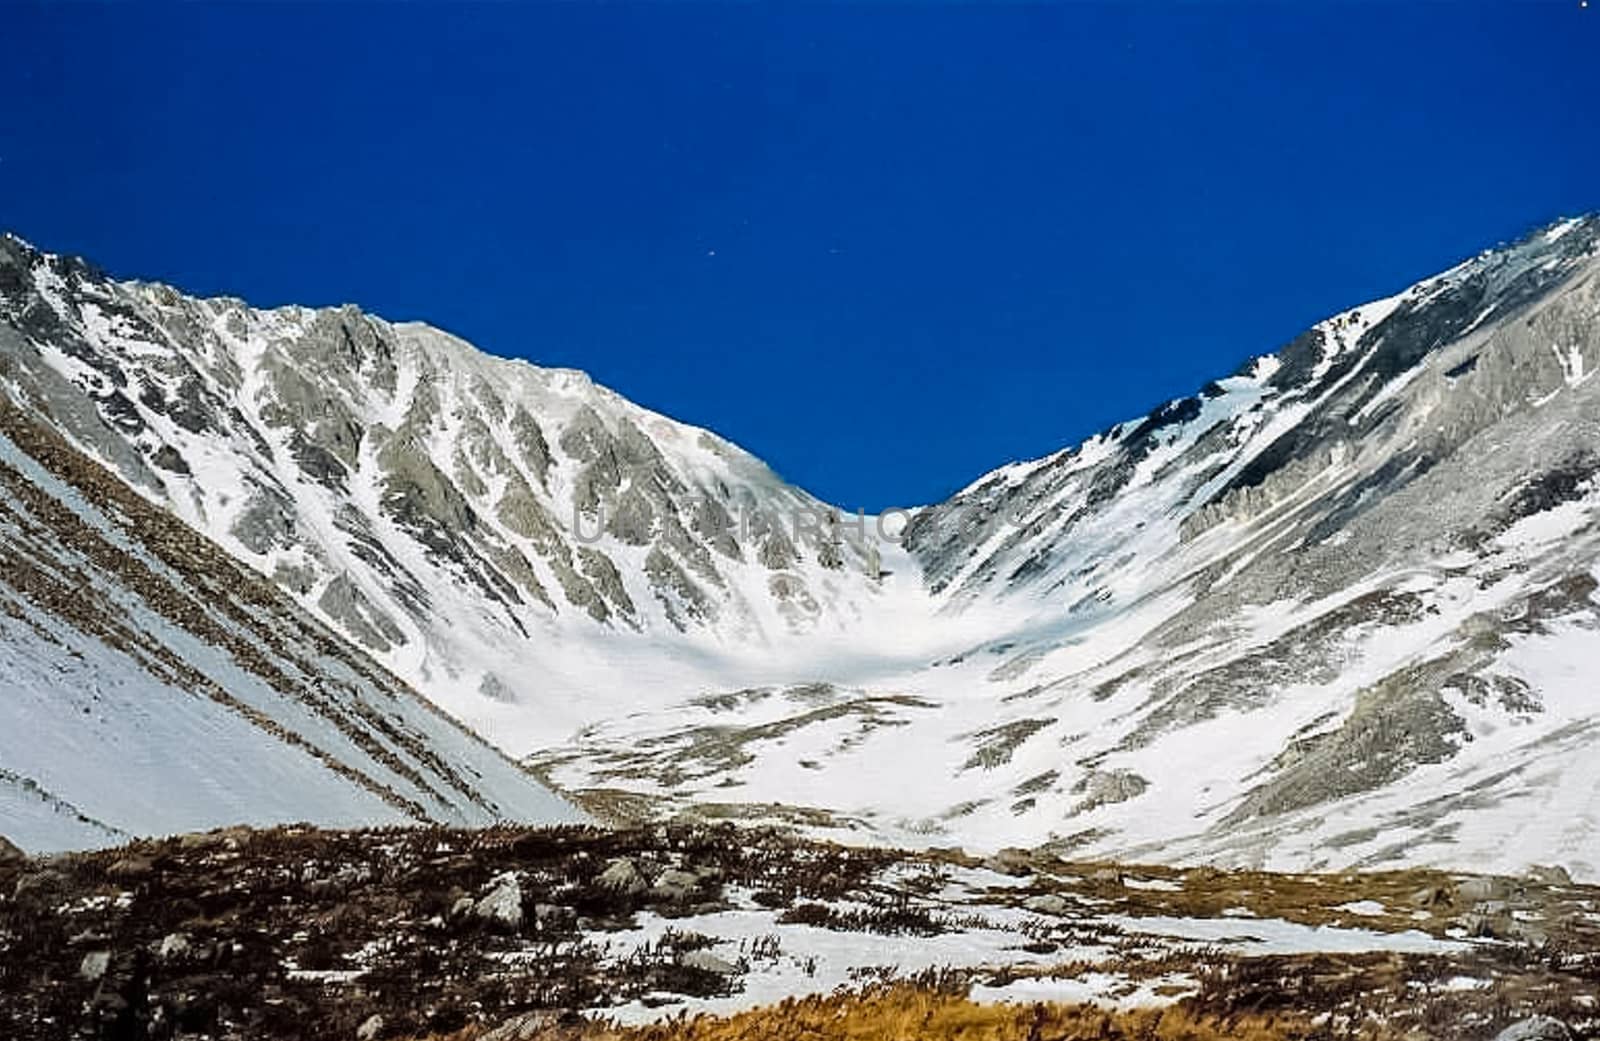 Mount Sayan in winter in the snow. The nature of the mountains is sayan.